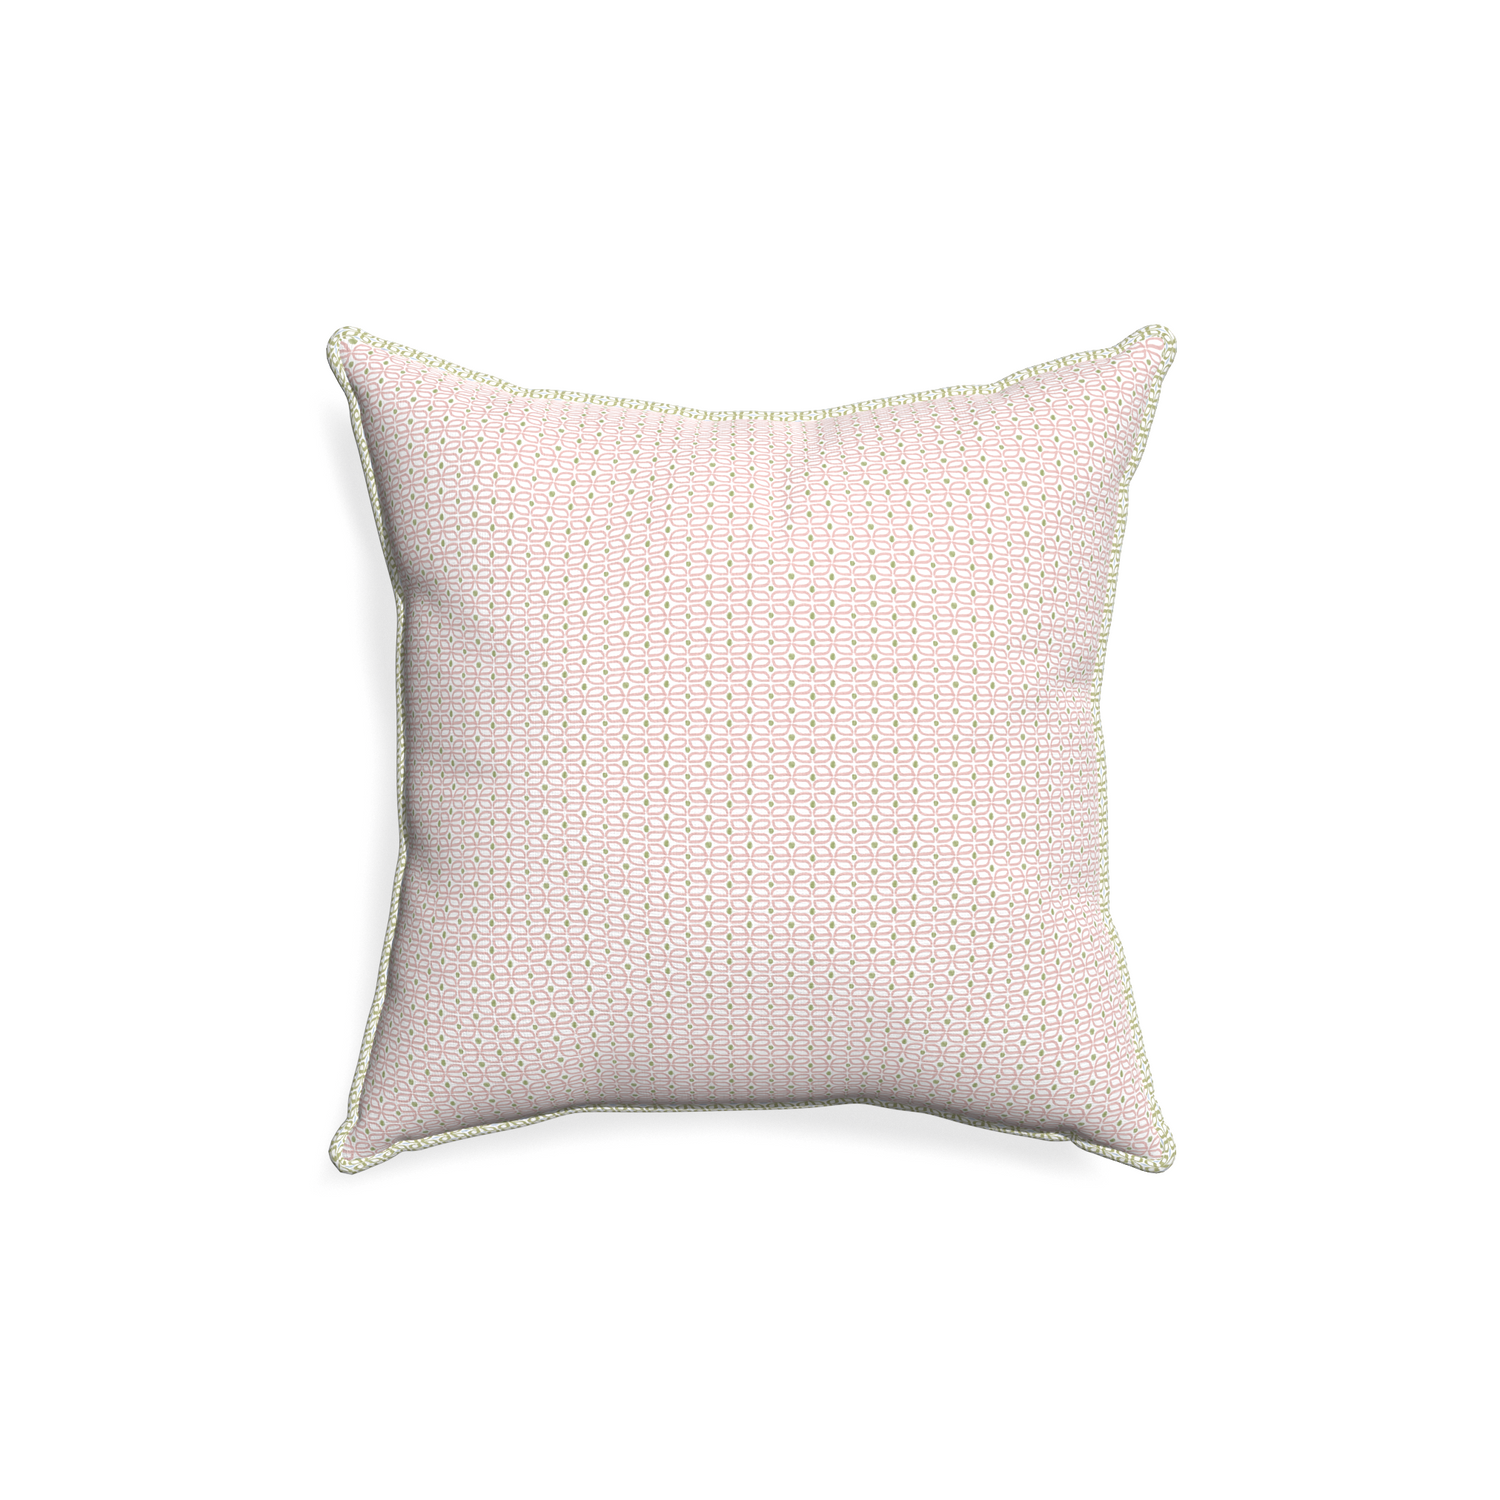 18-square loomi pink custom pillow with l piping on white background